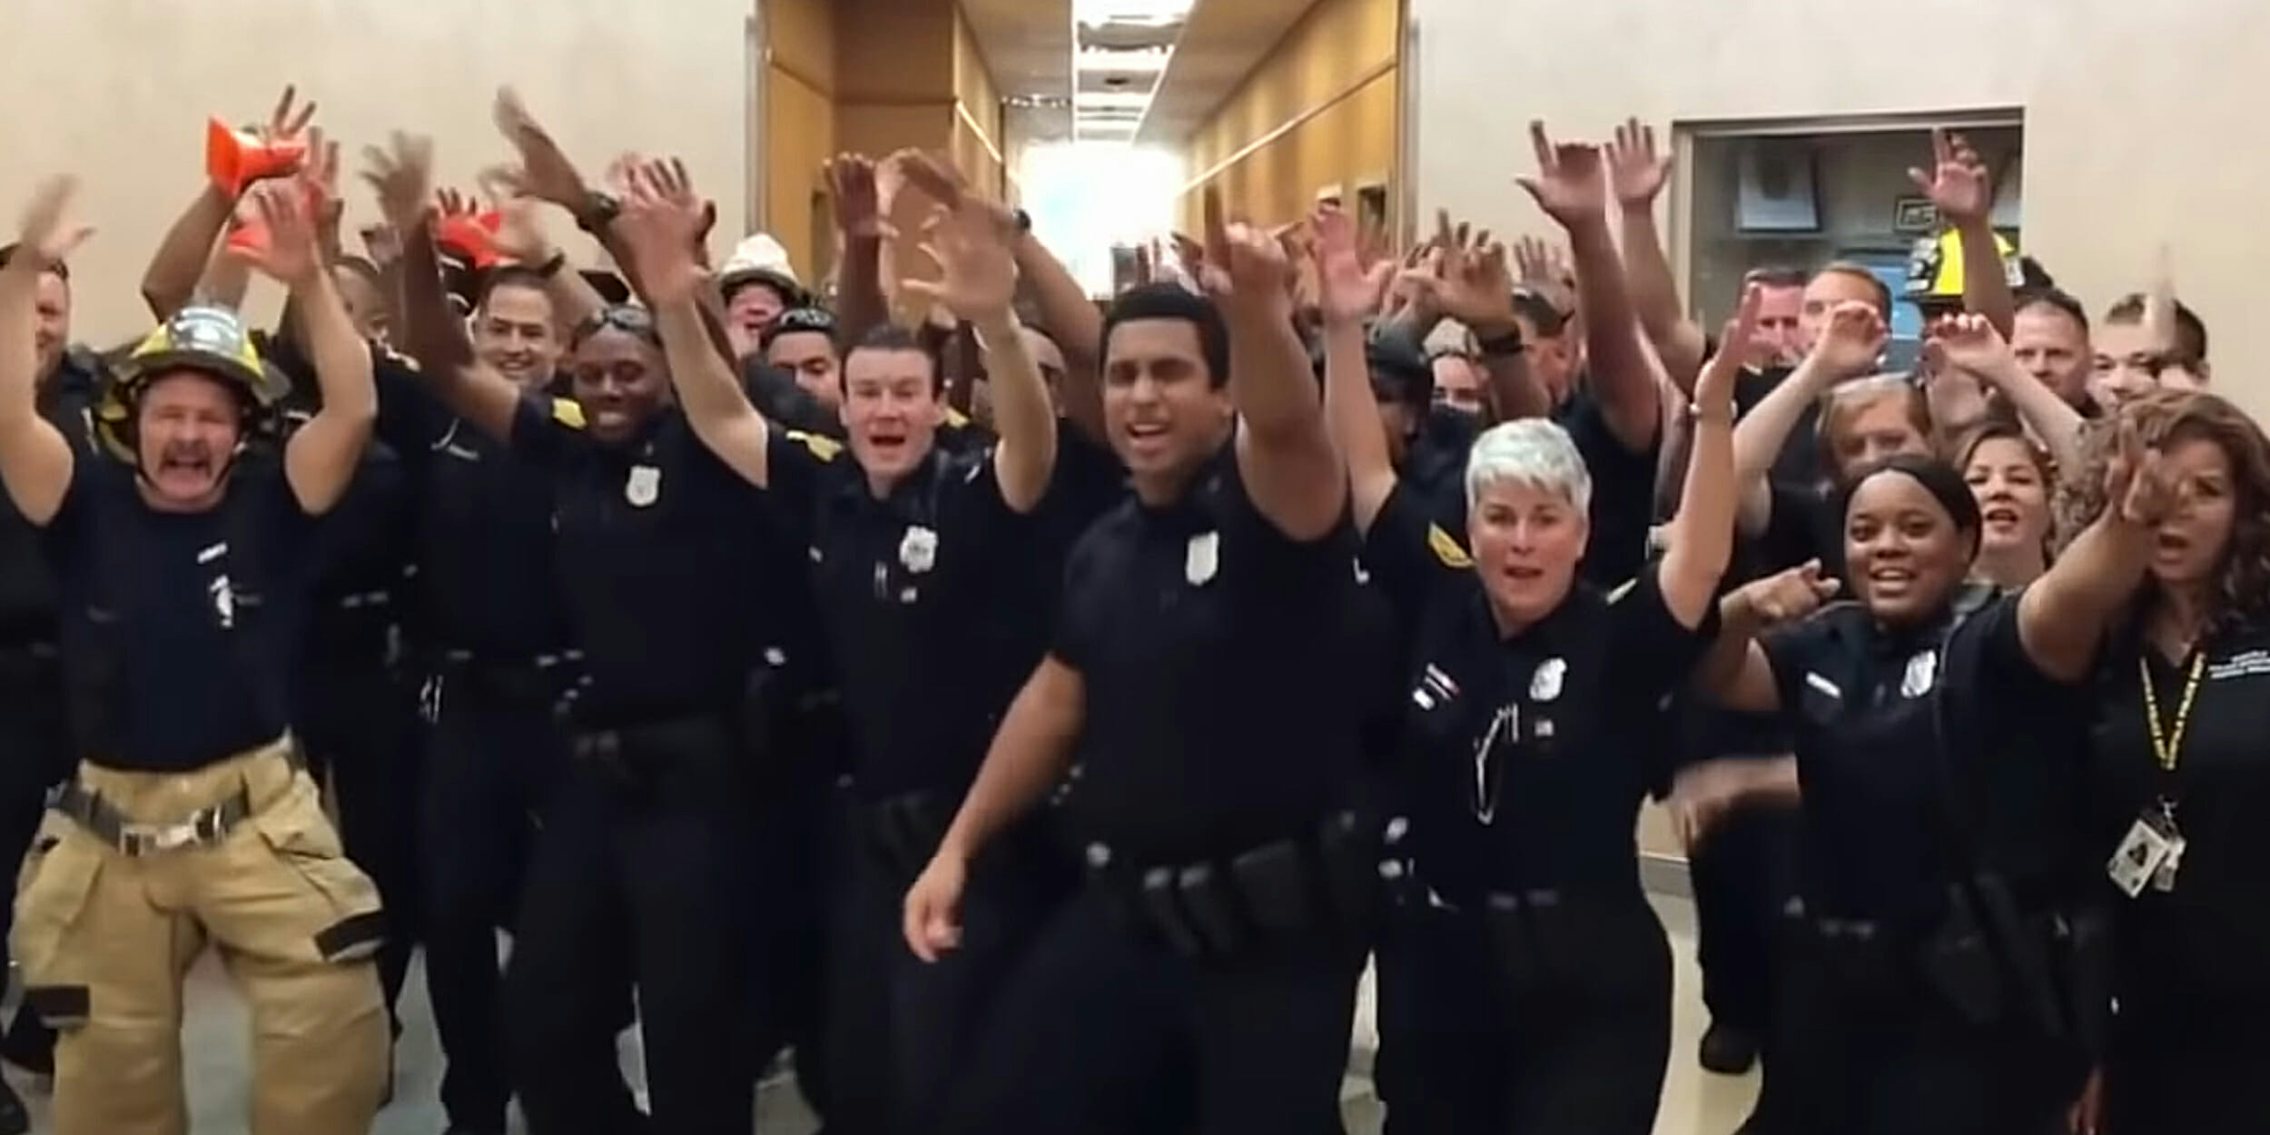 police department lip sync uptown funk